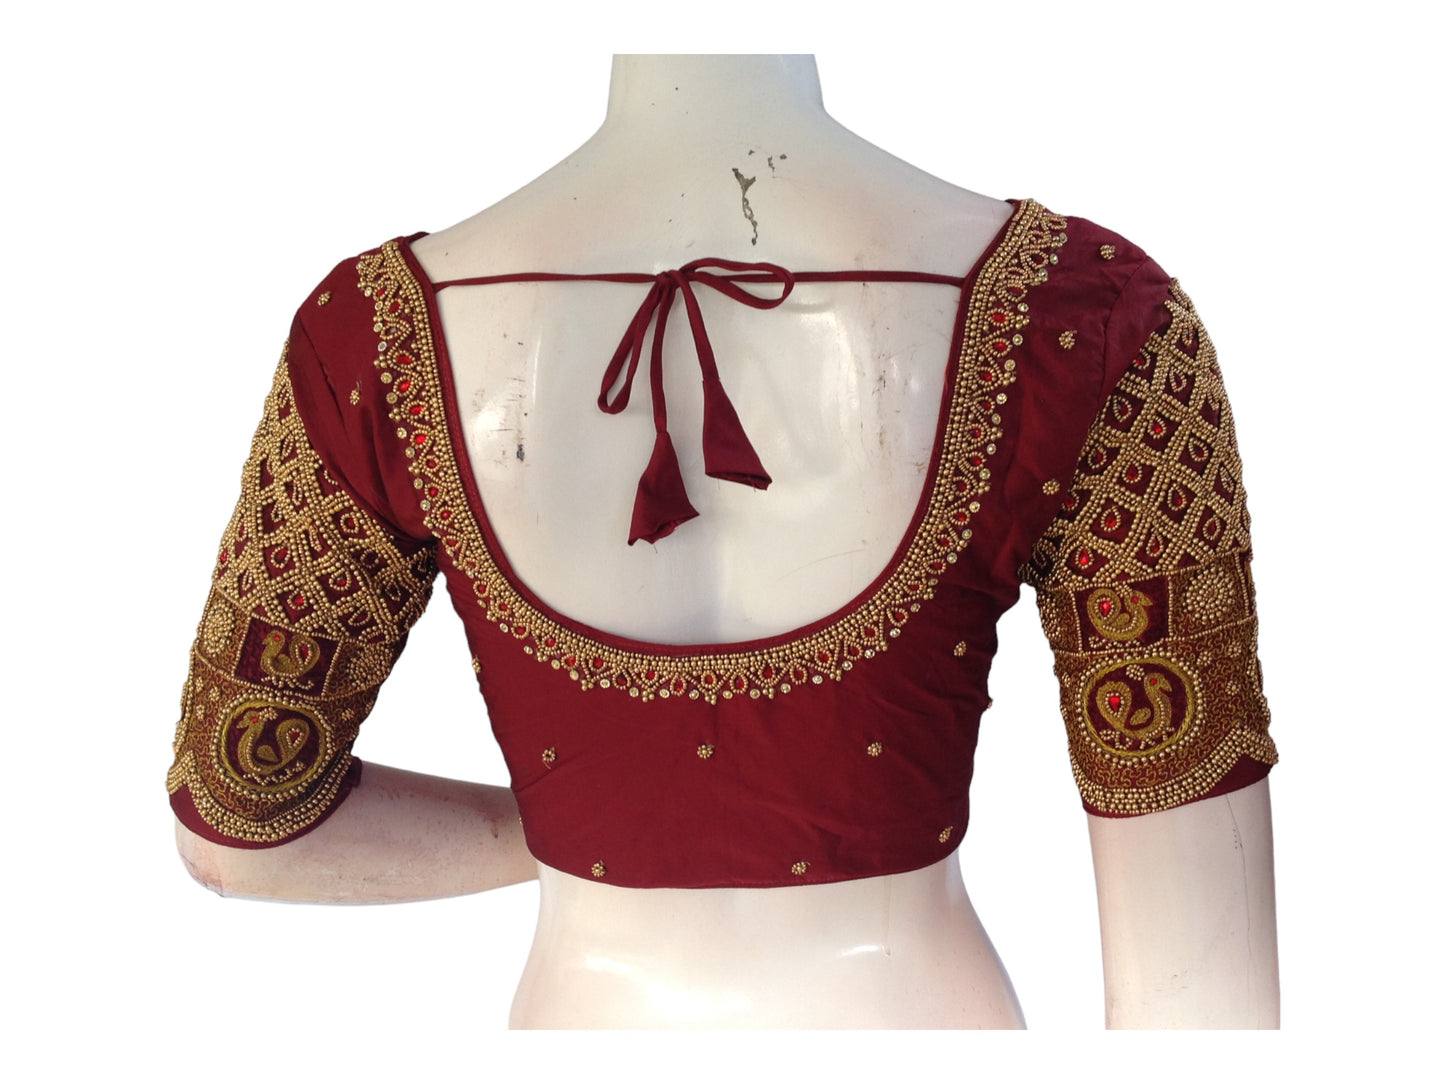 Complete your bridal ensemble with our Maroon Bridal Handwork Readymade Saree Blouse. Crafted with intricate details, this blouse adds elegance and tradition to your wedding attire. Shop now for the perfect Indian Ethnic Wedding Choli Top